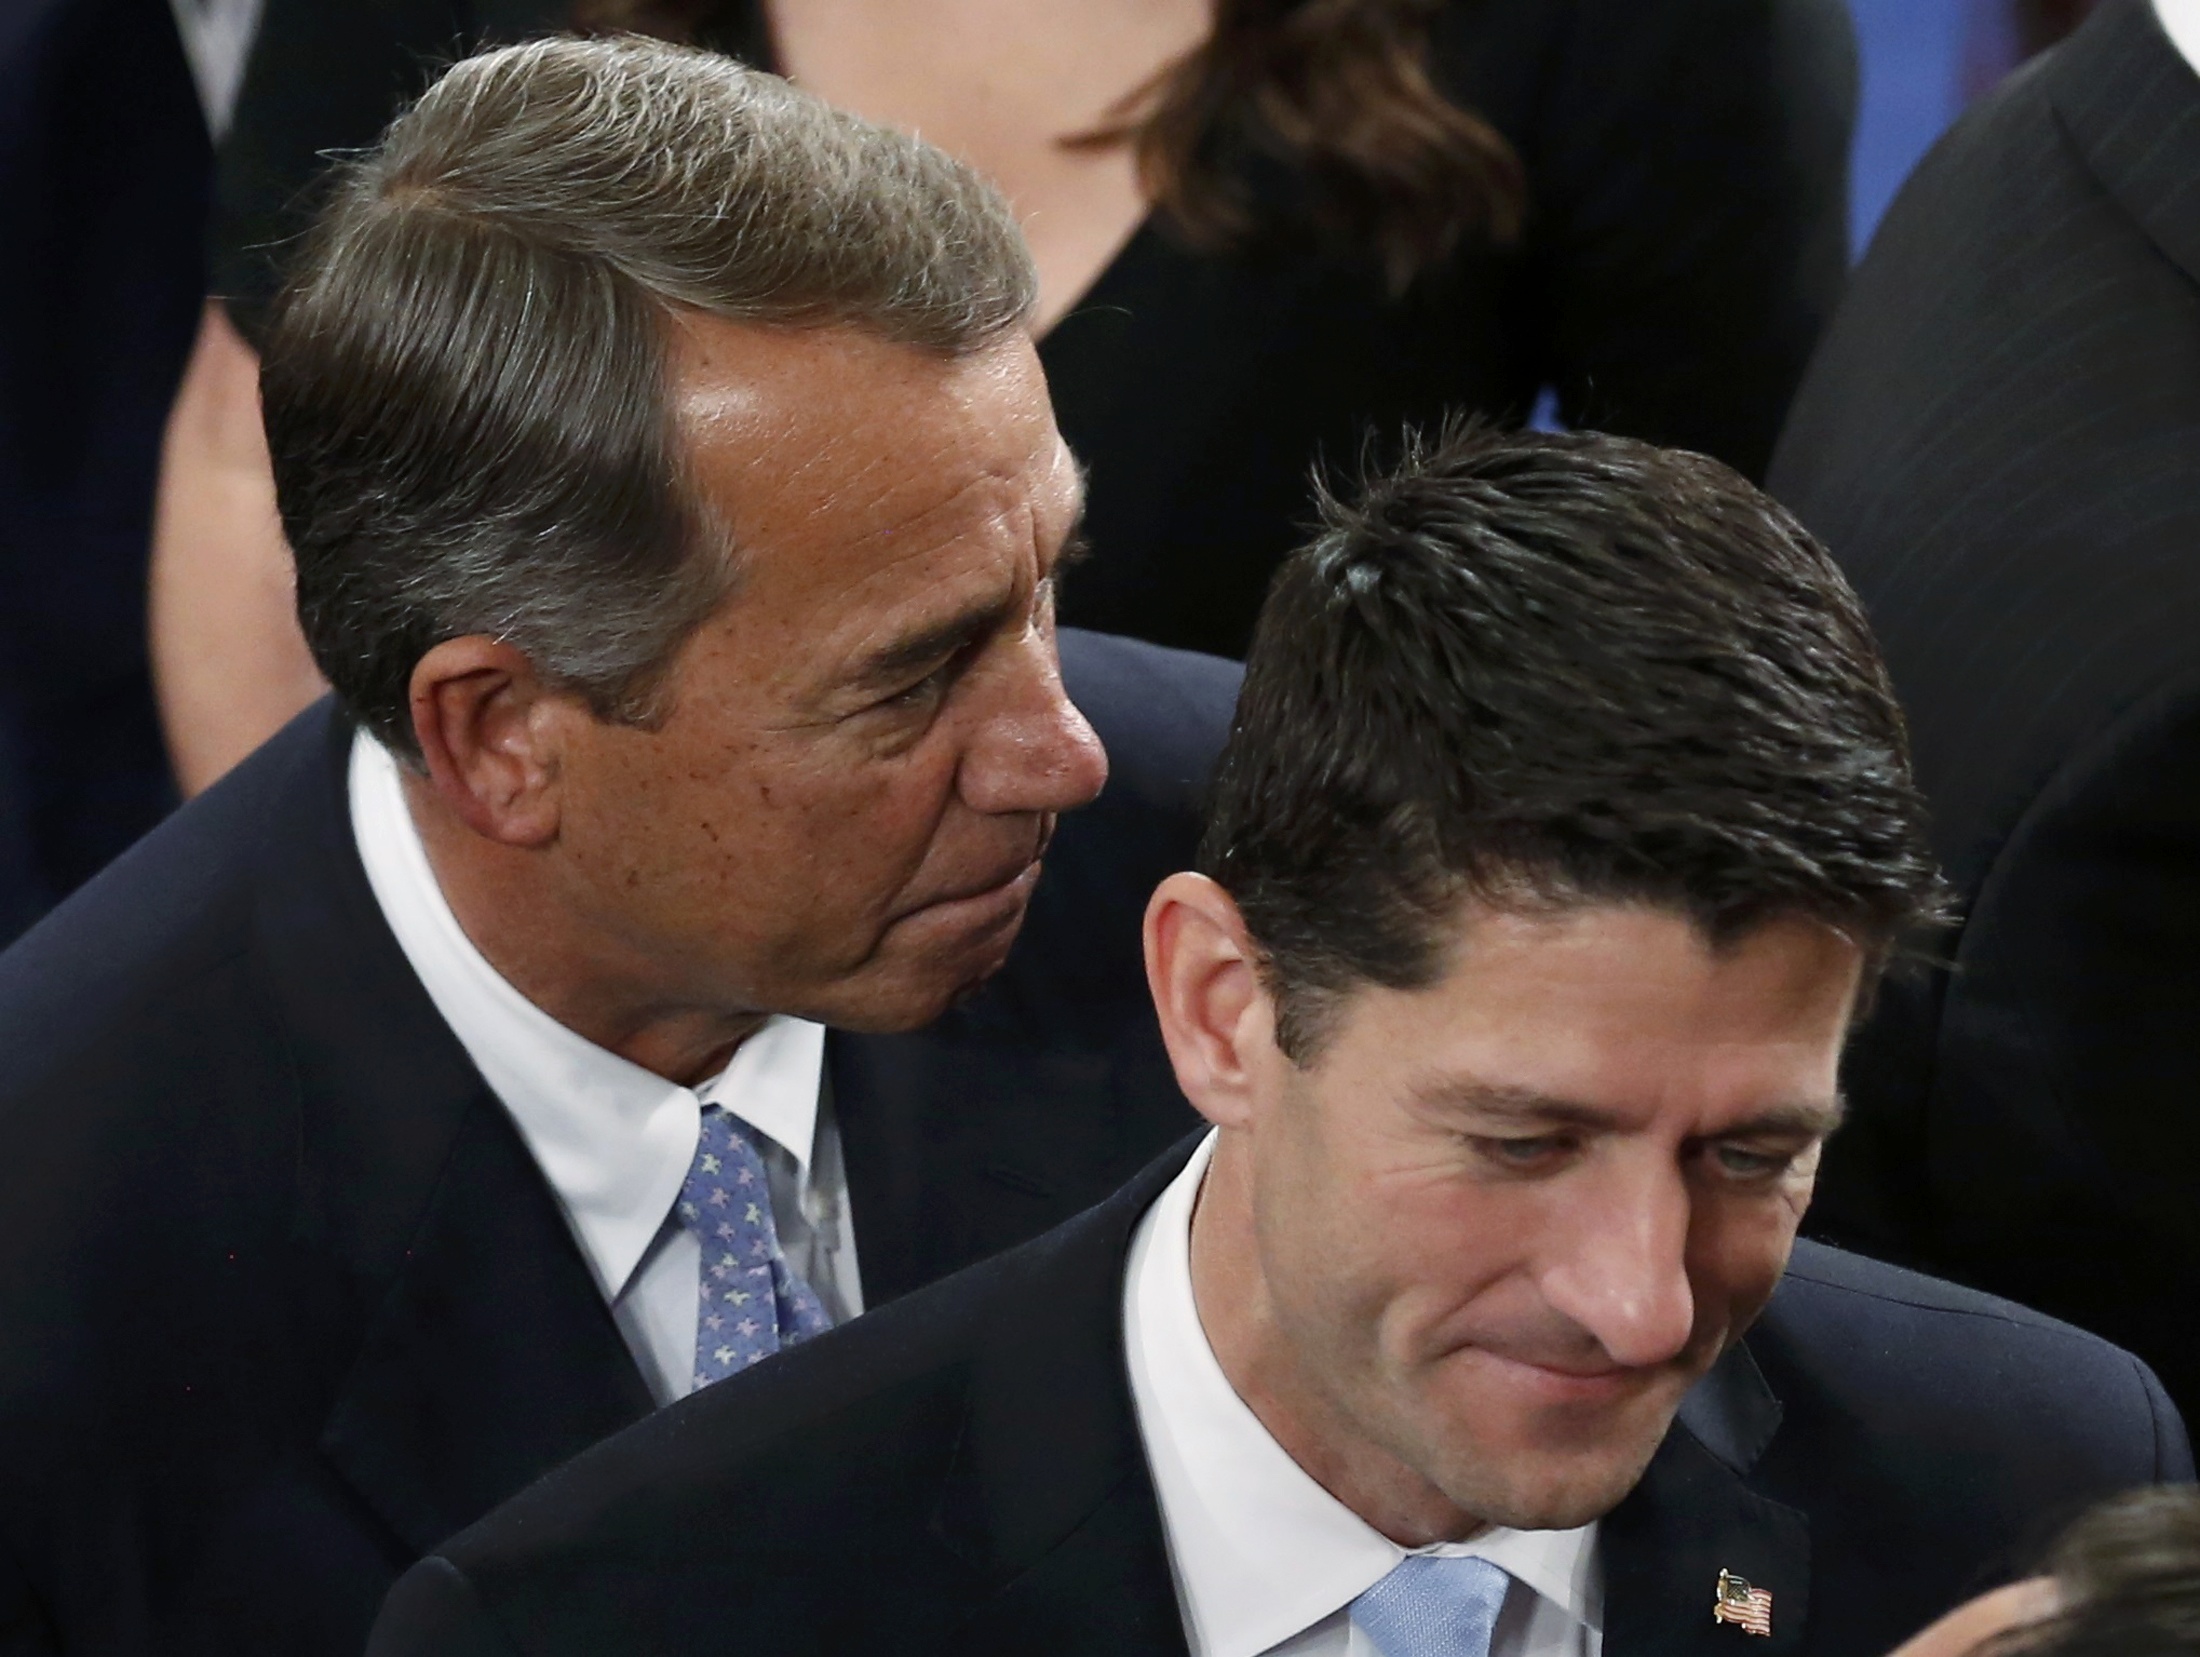 Hey, do you smell something? Outgoing House speaker John Boehner walks behind Paul Ryan prior to his election to succeed Boehner. Photo: Reuters